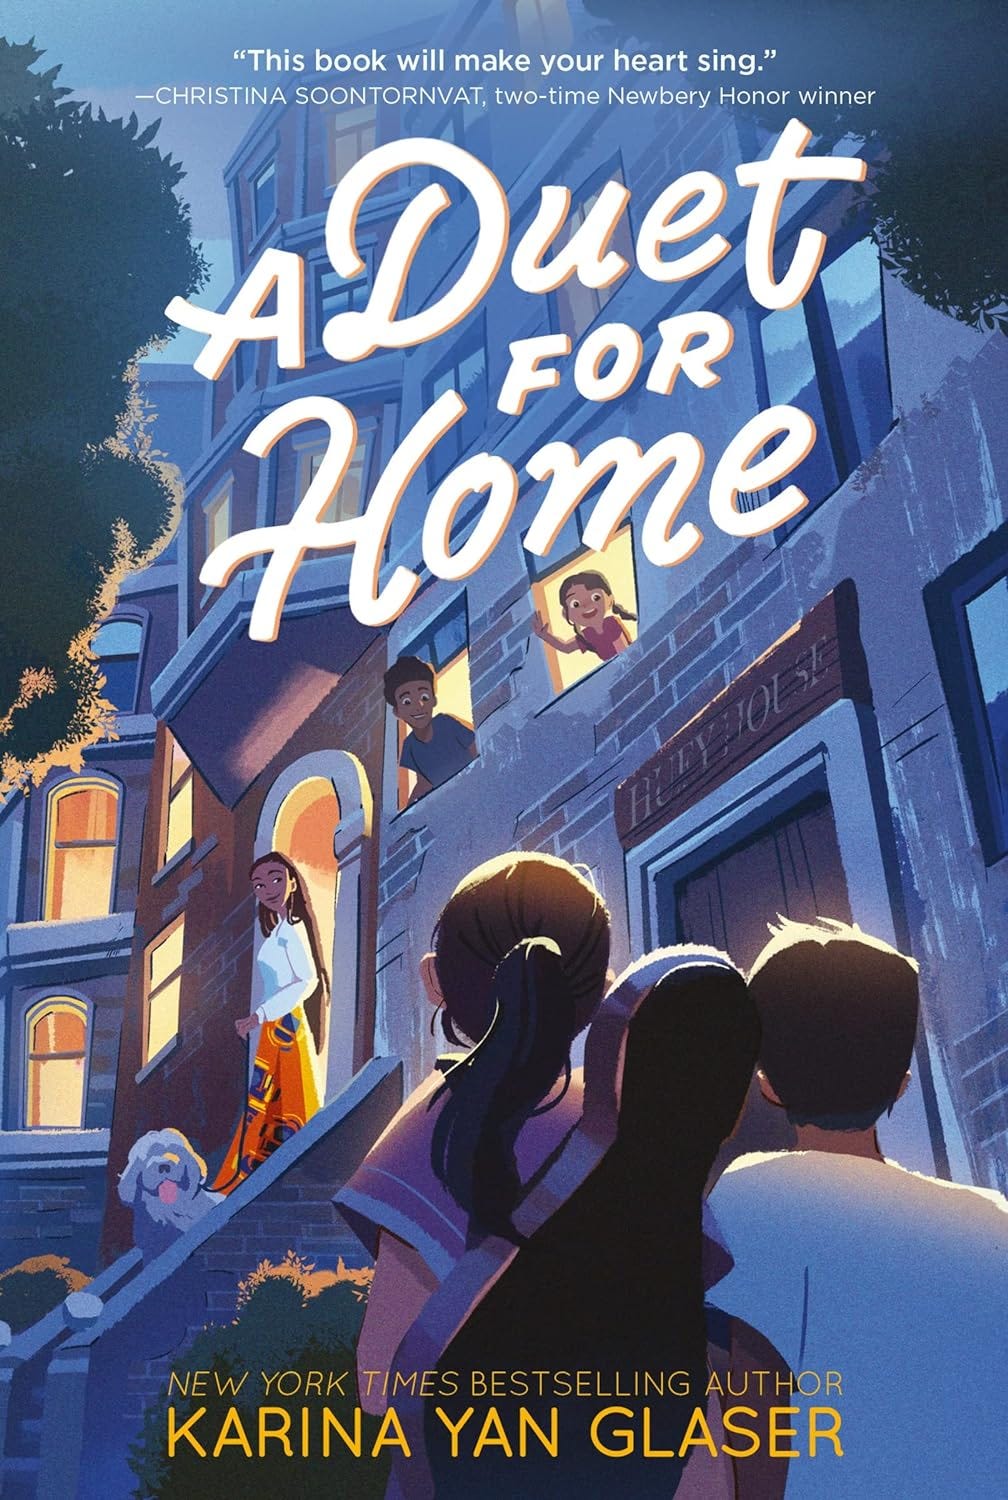 The cover of A Duet for Home shows a group of children in front of a darkened building, looking up at a lit-up brownstone next door with a woman and a dog on the stoop